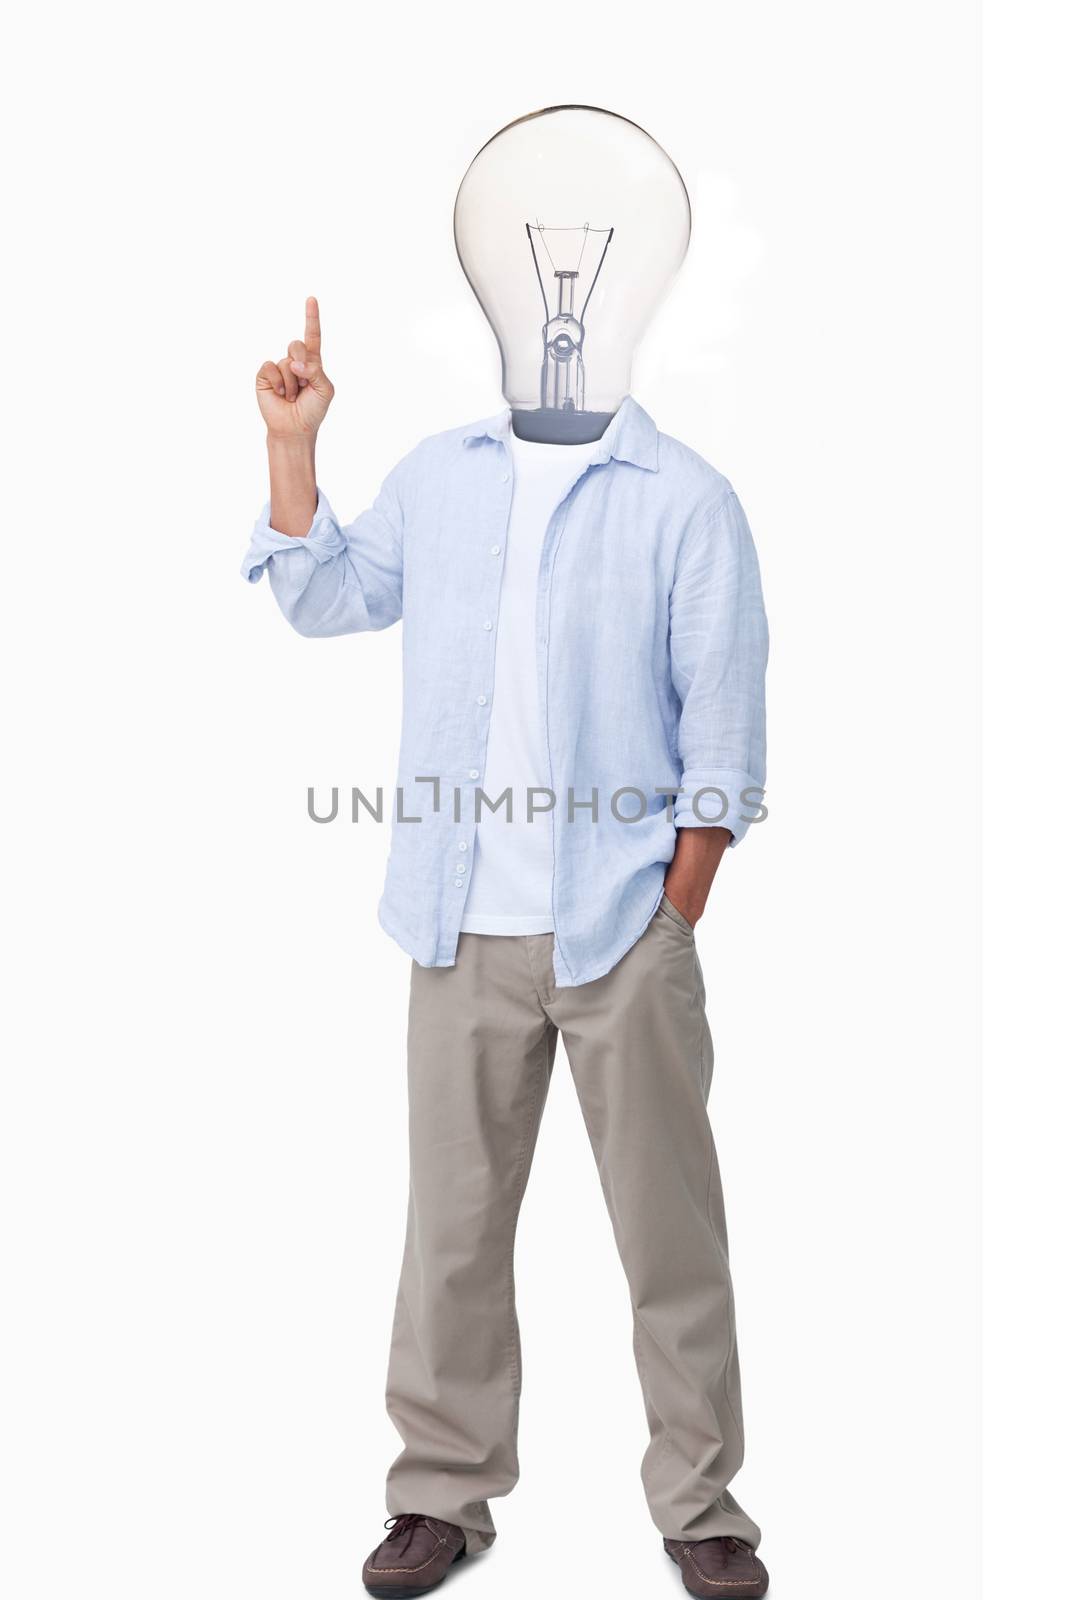 Man with light bulb head asking question on white background